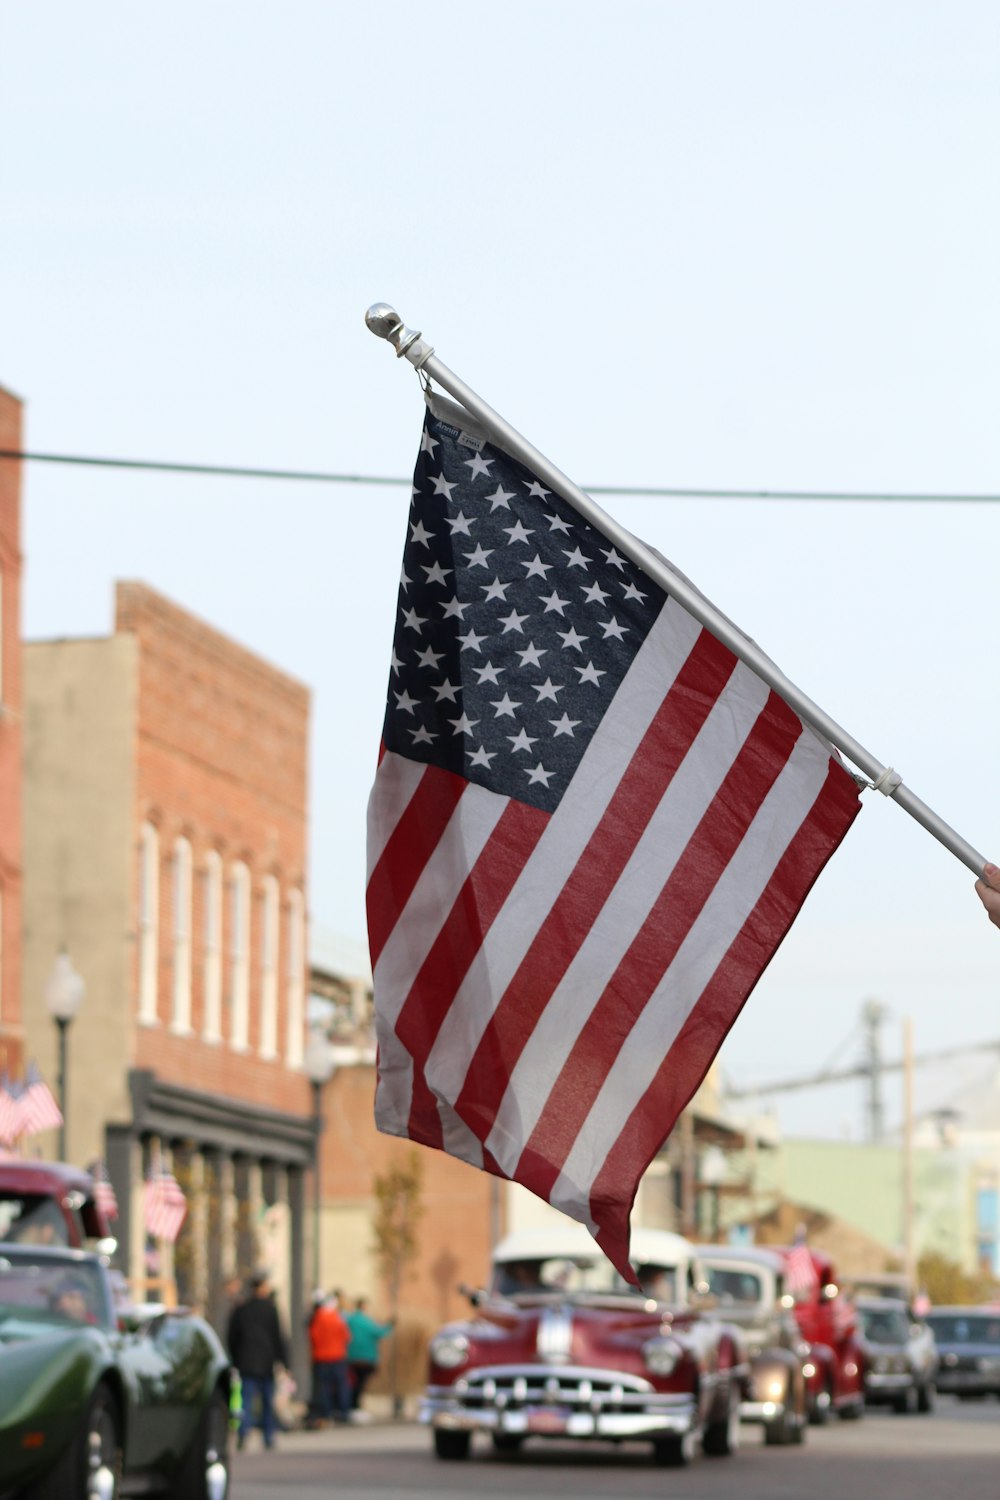 The American Flag flows at the annual Veterans Day Parade in Owensboro, Kentucky, as the Antique Car Club drives by.